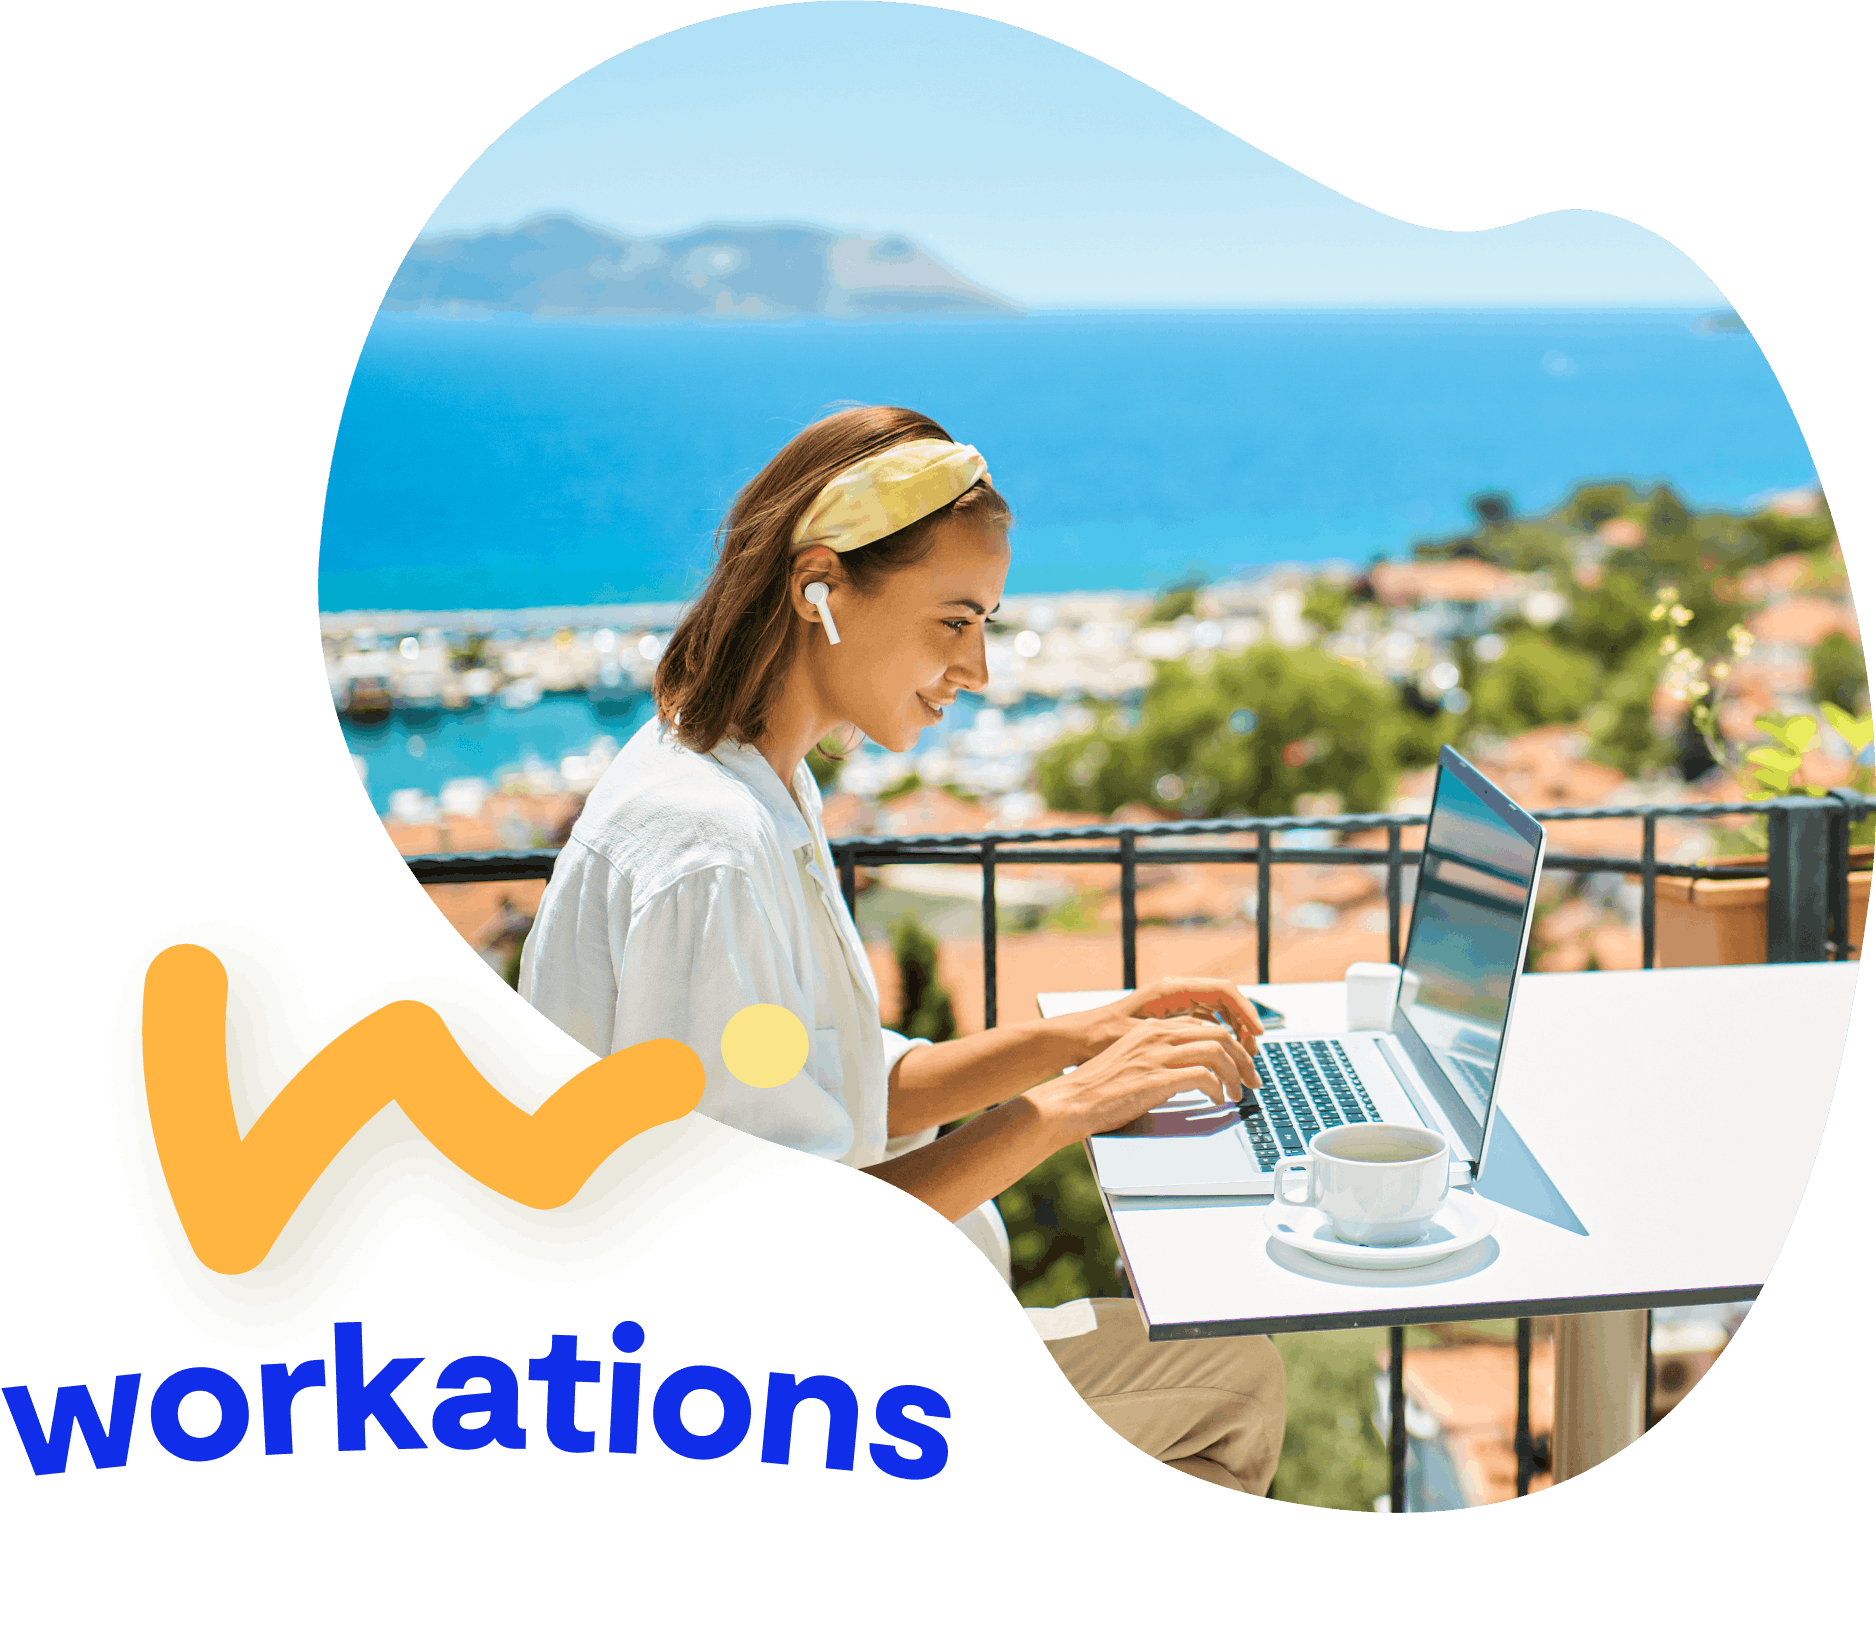 Workations made easy with Localyze